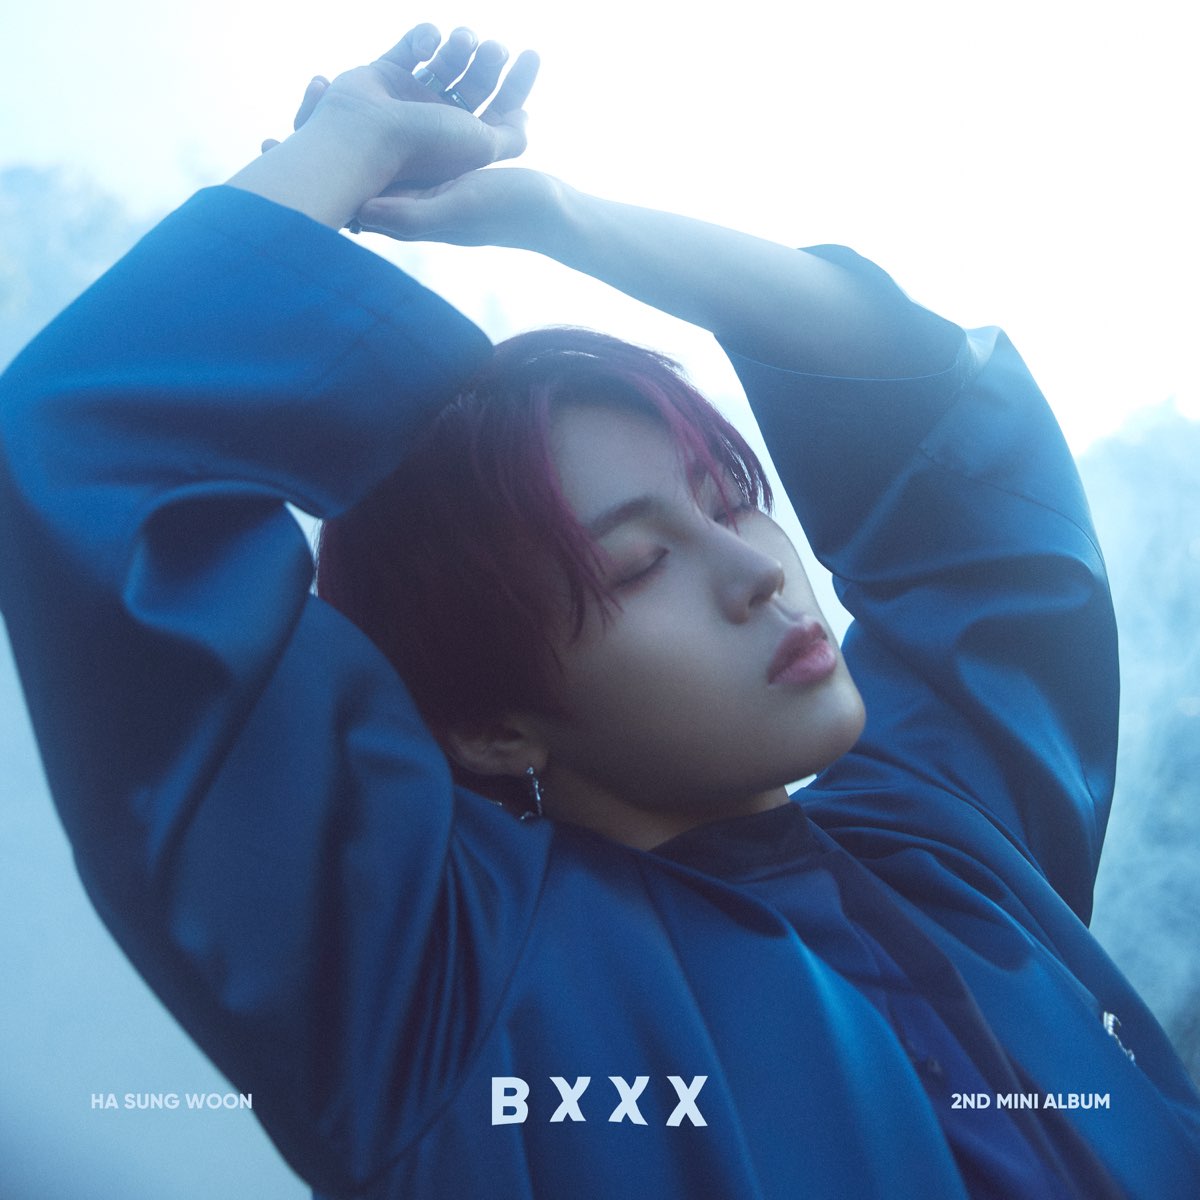 Bxxx - EP by HA SUNG WOON on Apple Music